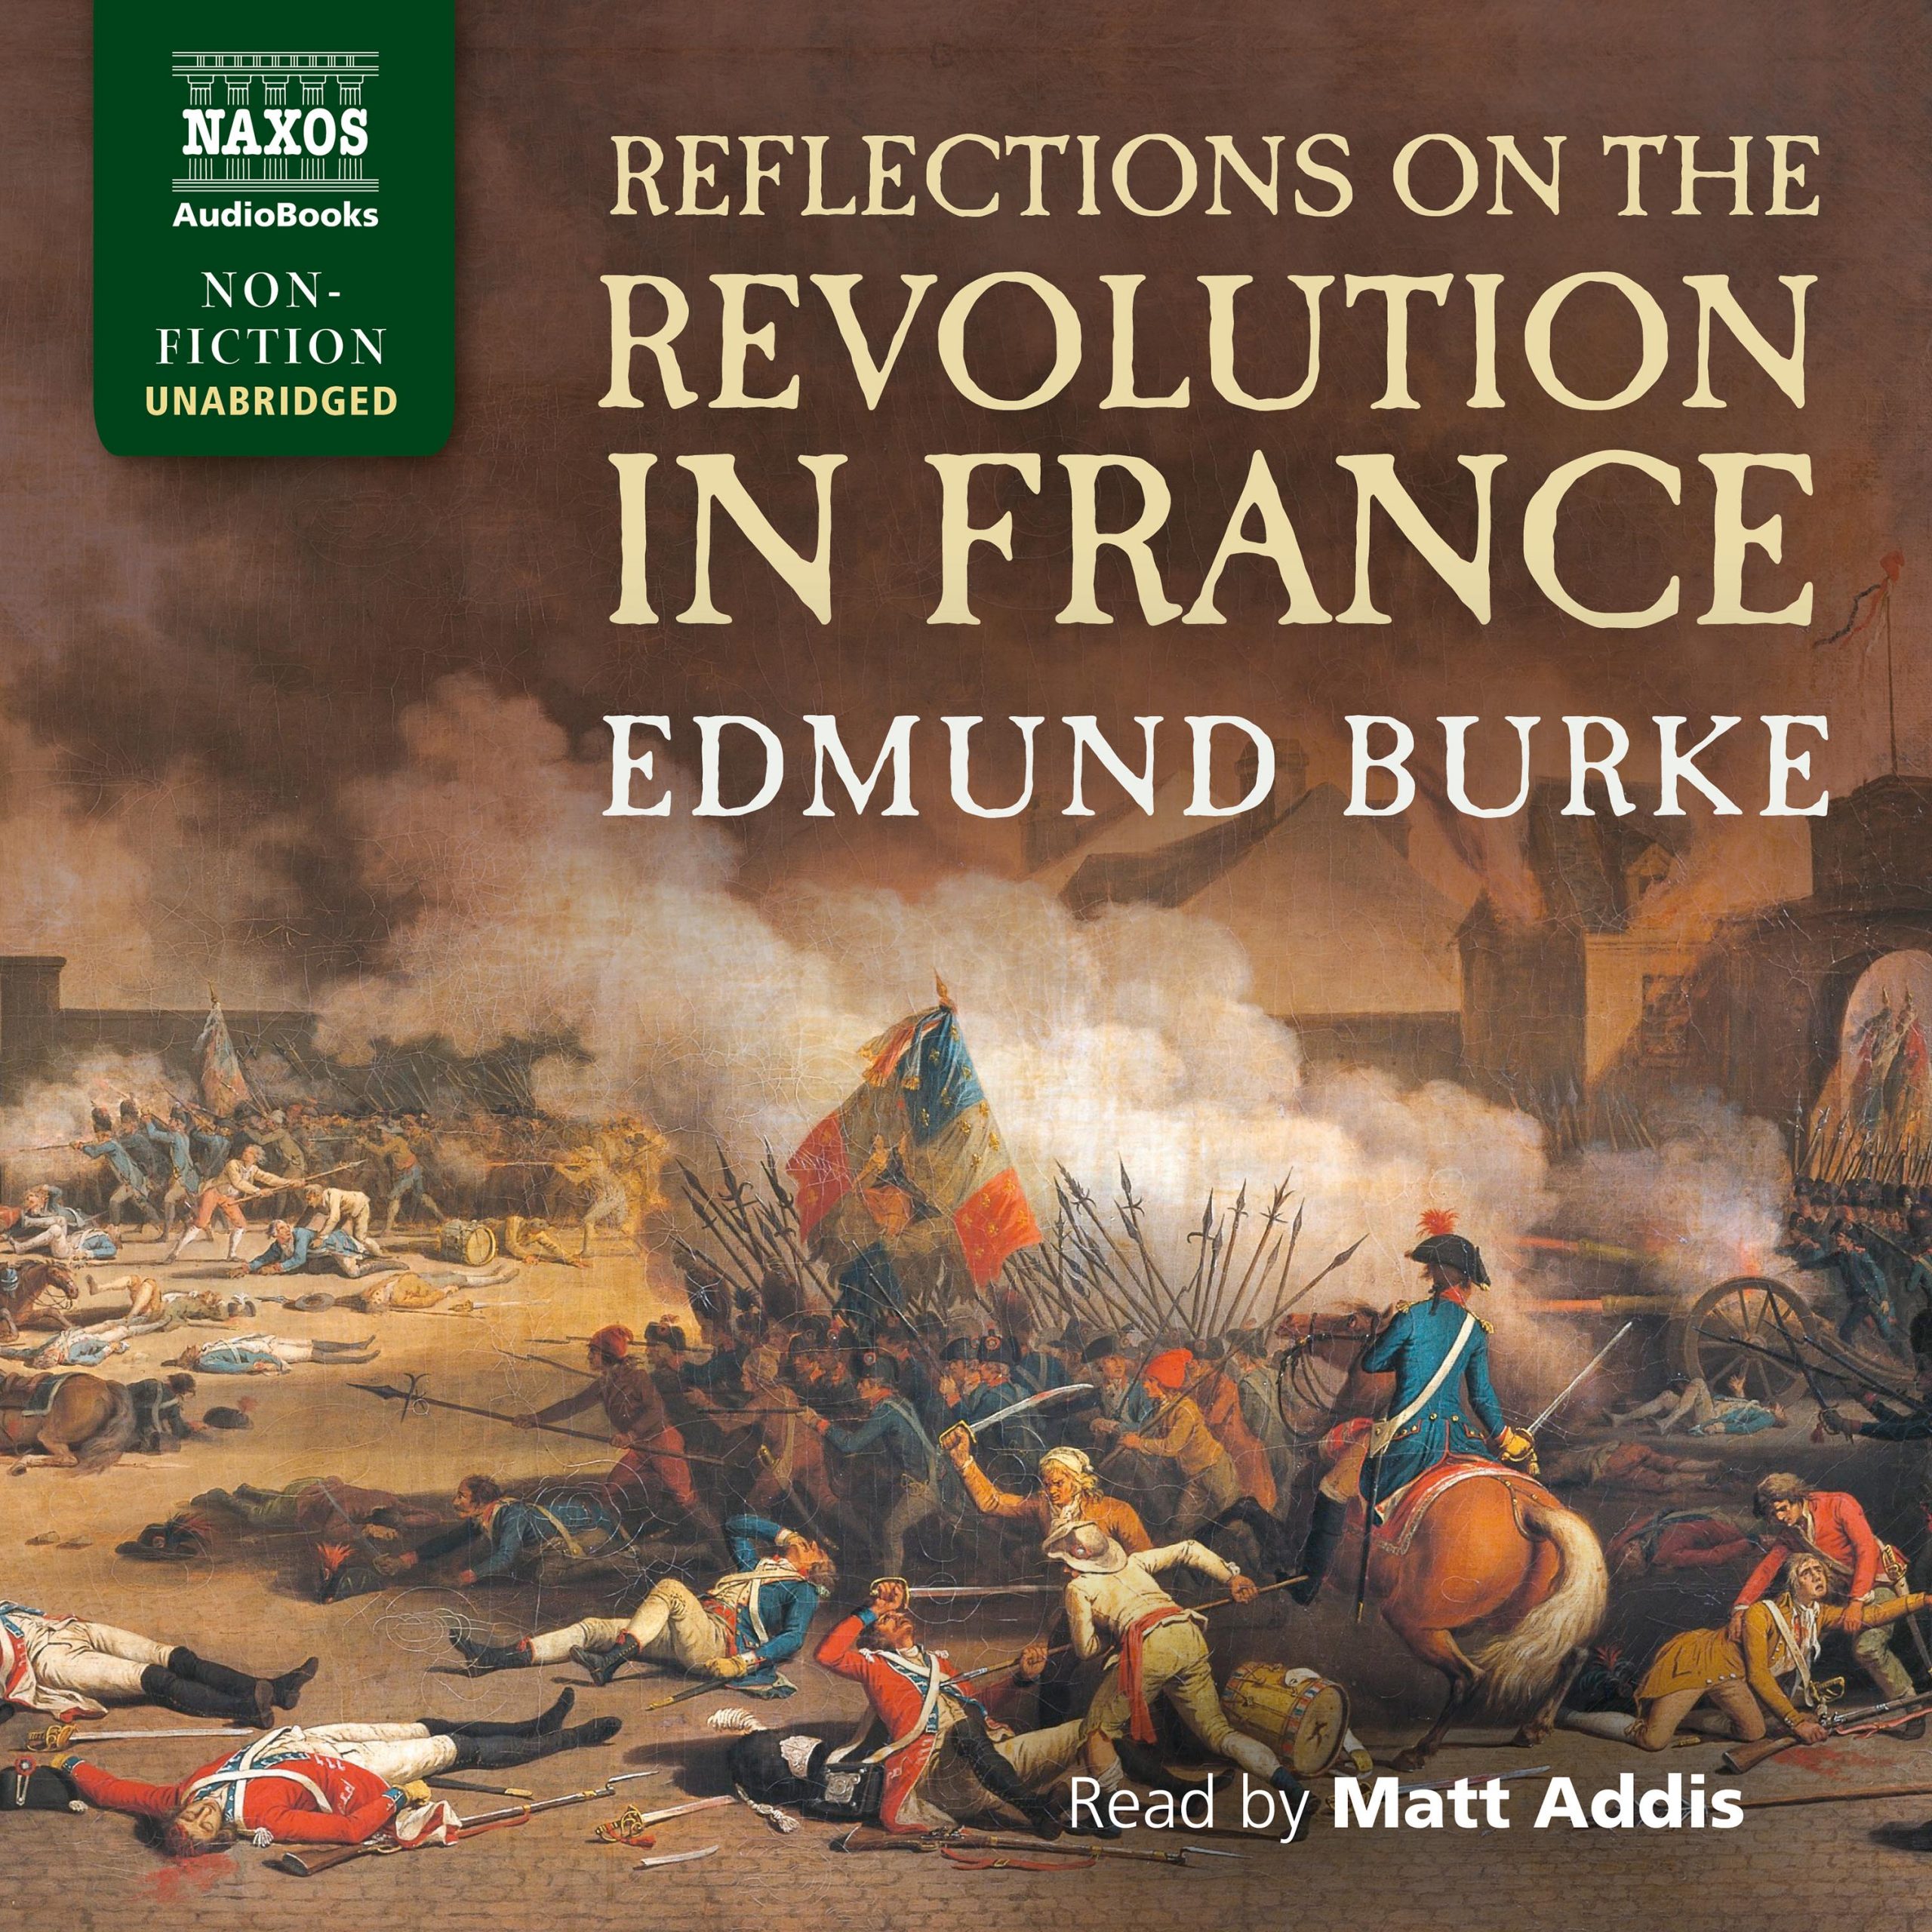 Reflections on the Revolution in France (unabridged)